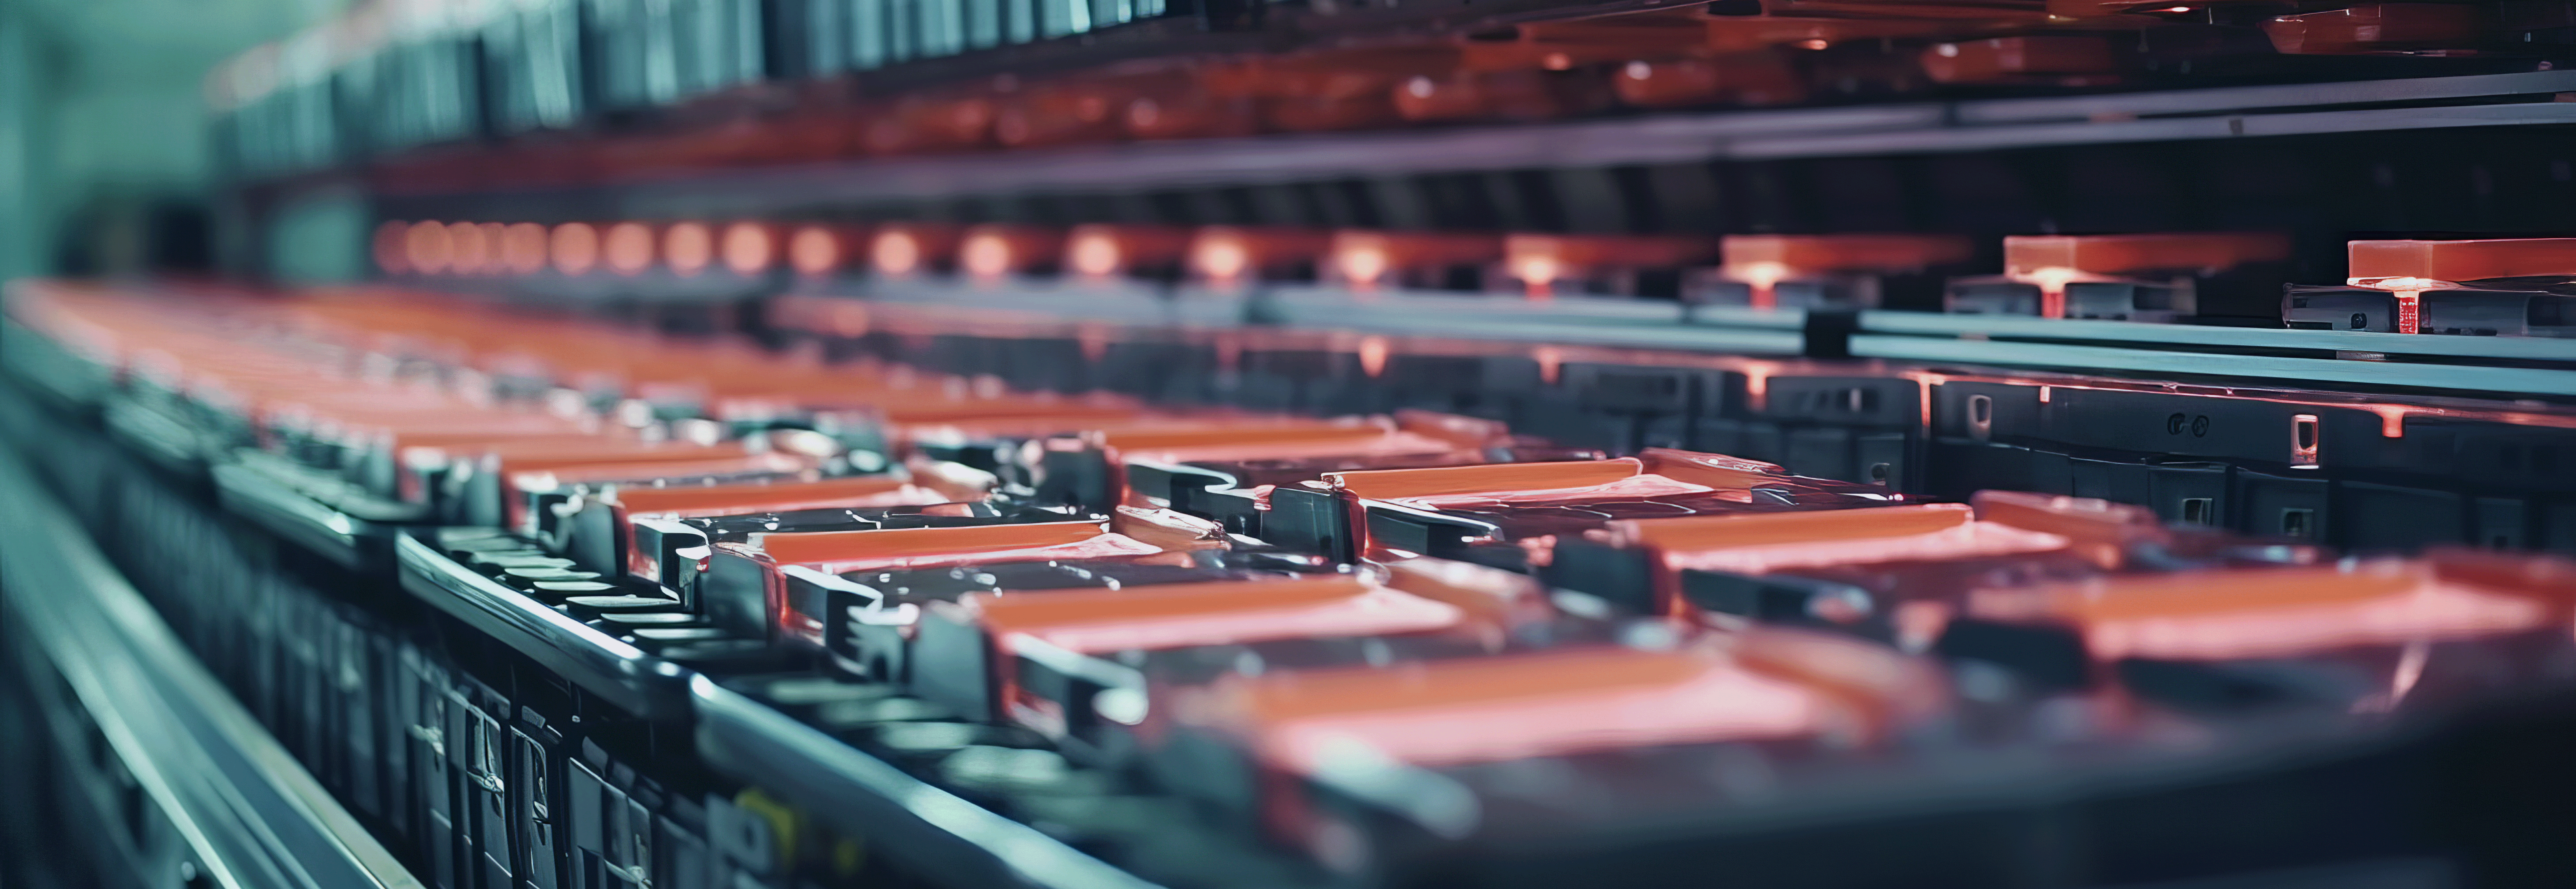 Mass production assembly line of electric vehicle battery cells close-up view 